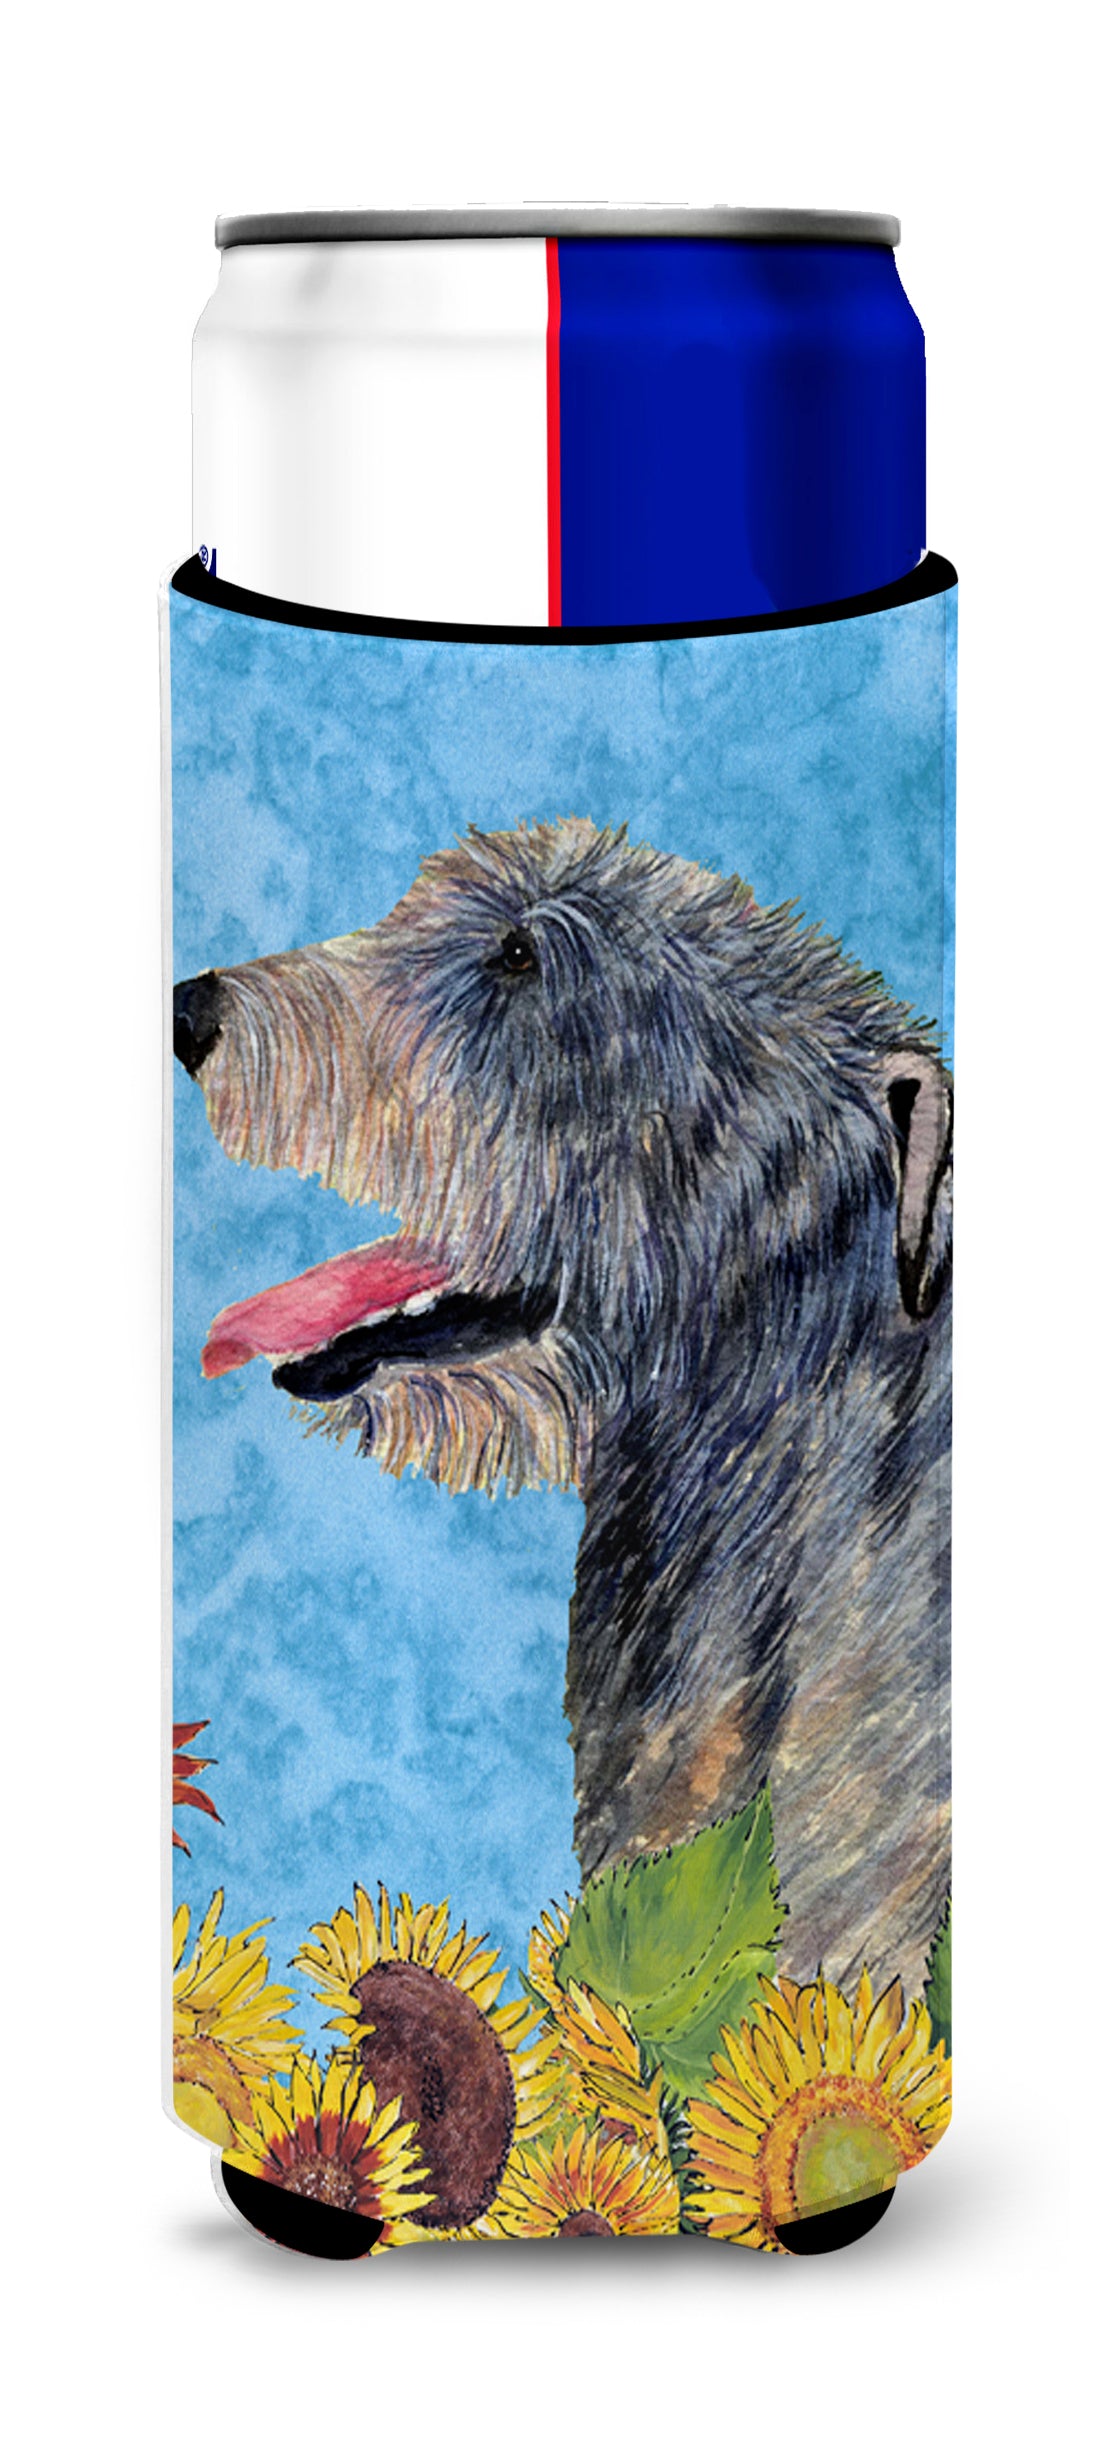 Irish Wolfhound in Summer Flowers Ultra Beverage Insulators for slim cans SS4139MUK